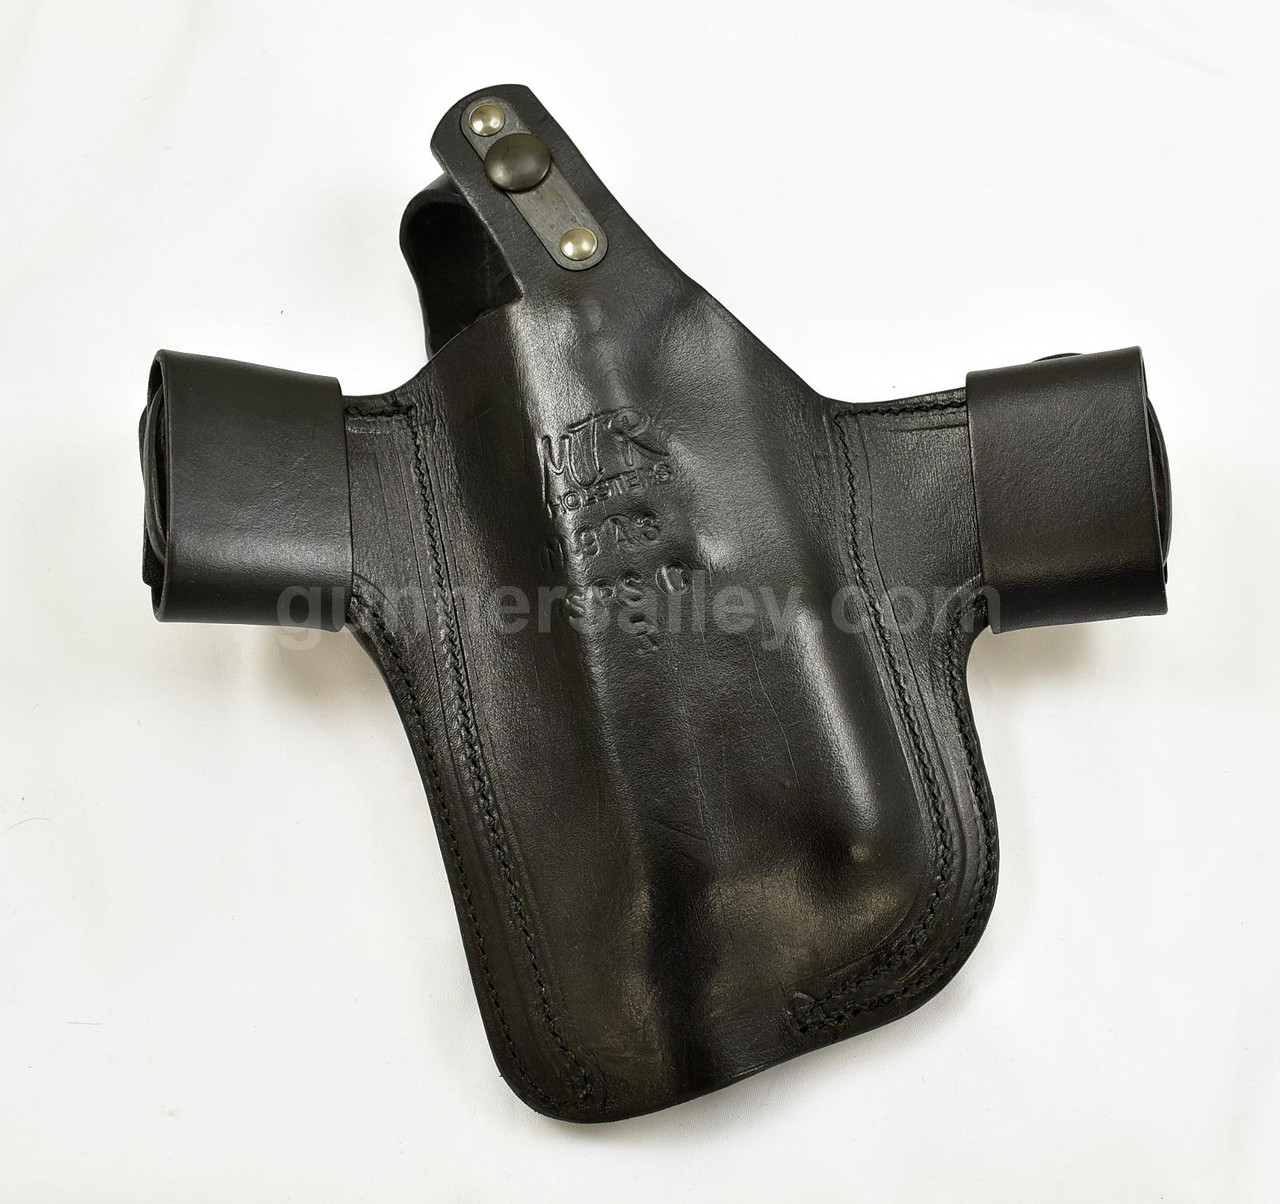 RH Black MTR Custom Deluxe Fullsize Quicksnap Holster with Retention Strap for a Beretta M9A3 with a LaserMax Spartan SPS-C-R Light/Laser - Rear View